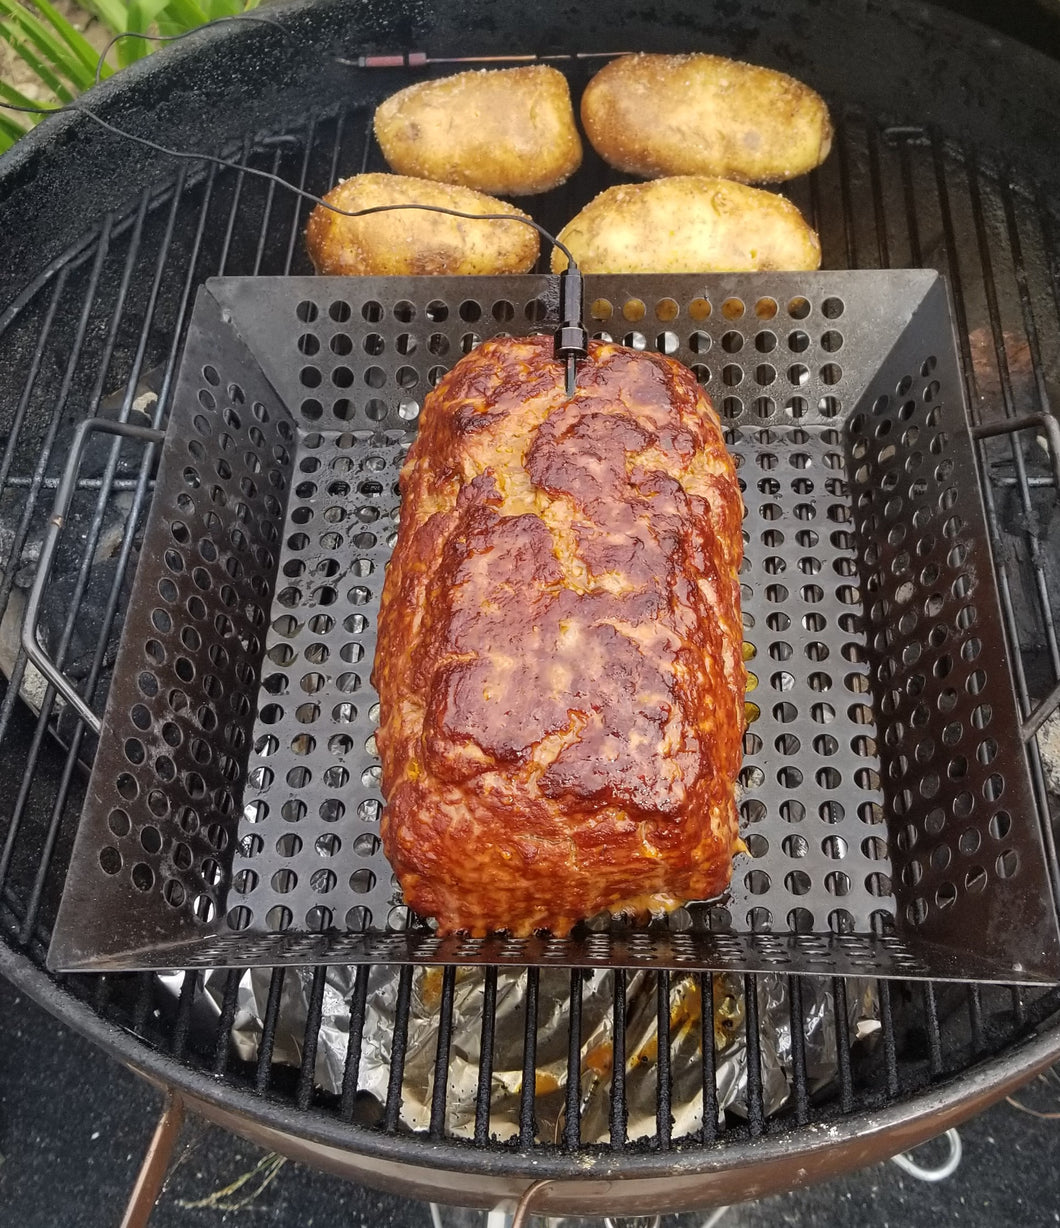 Trucker's Meatloaf (Two Pounds Pre Cooked Weight)